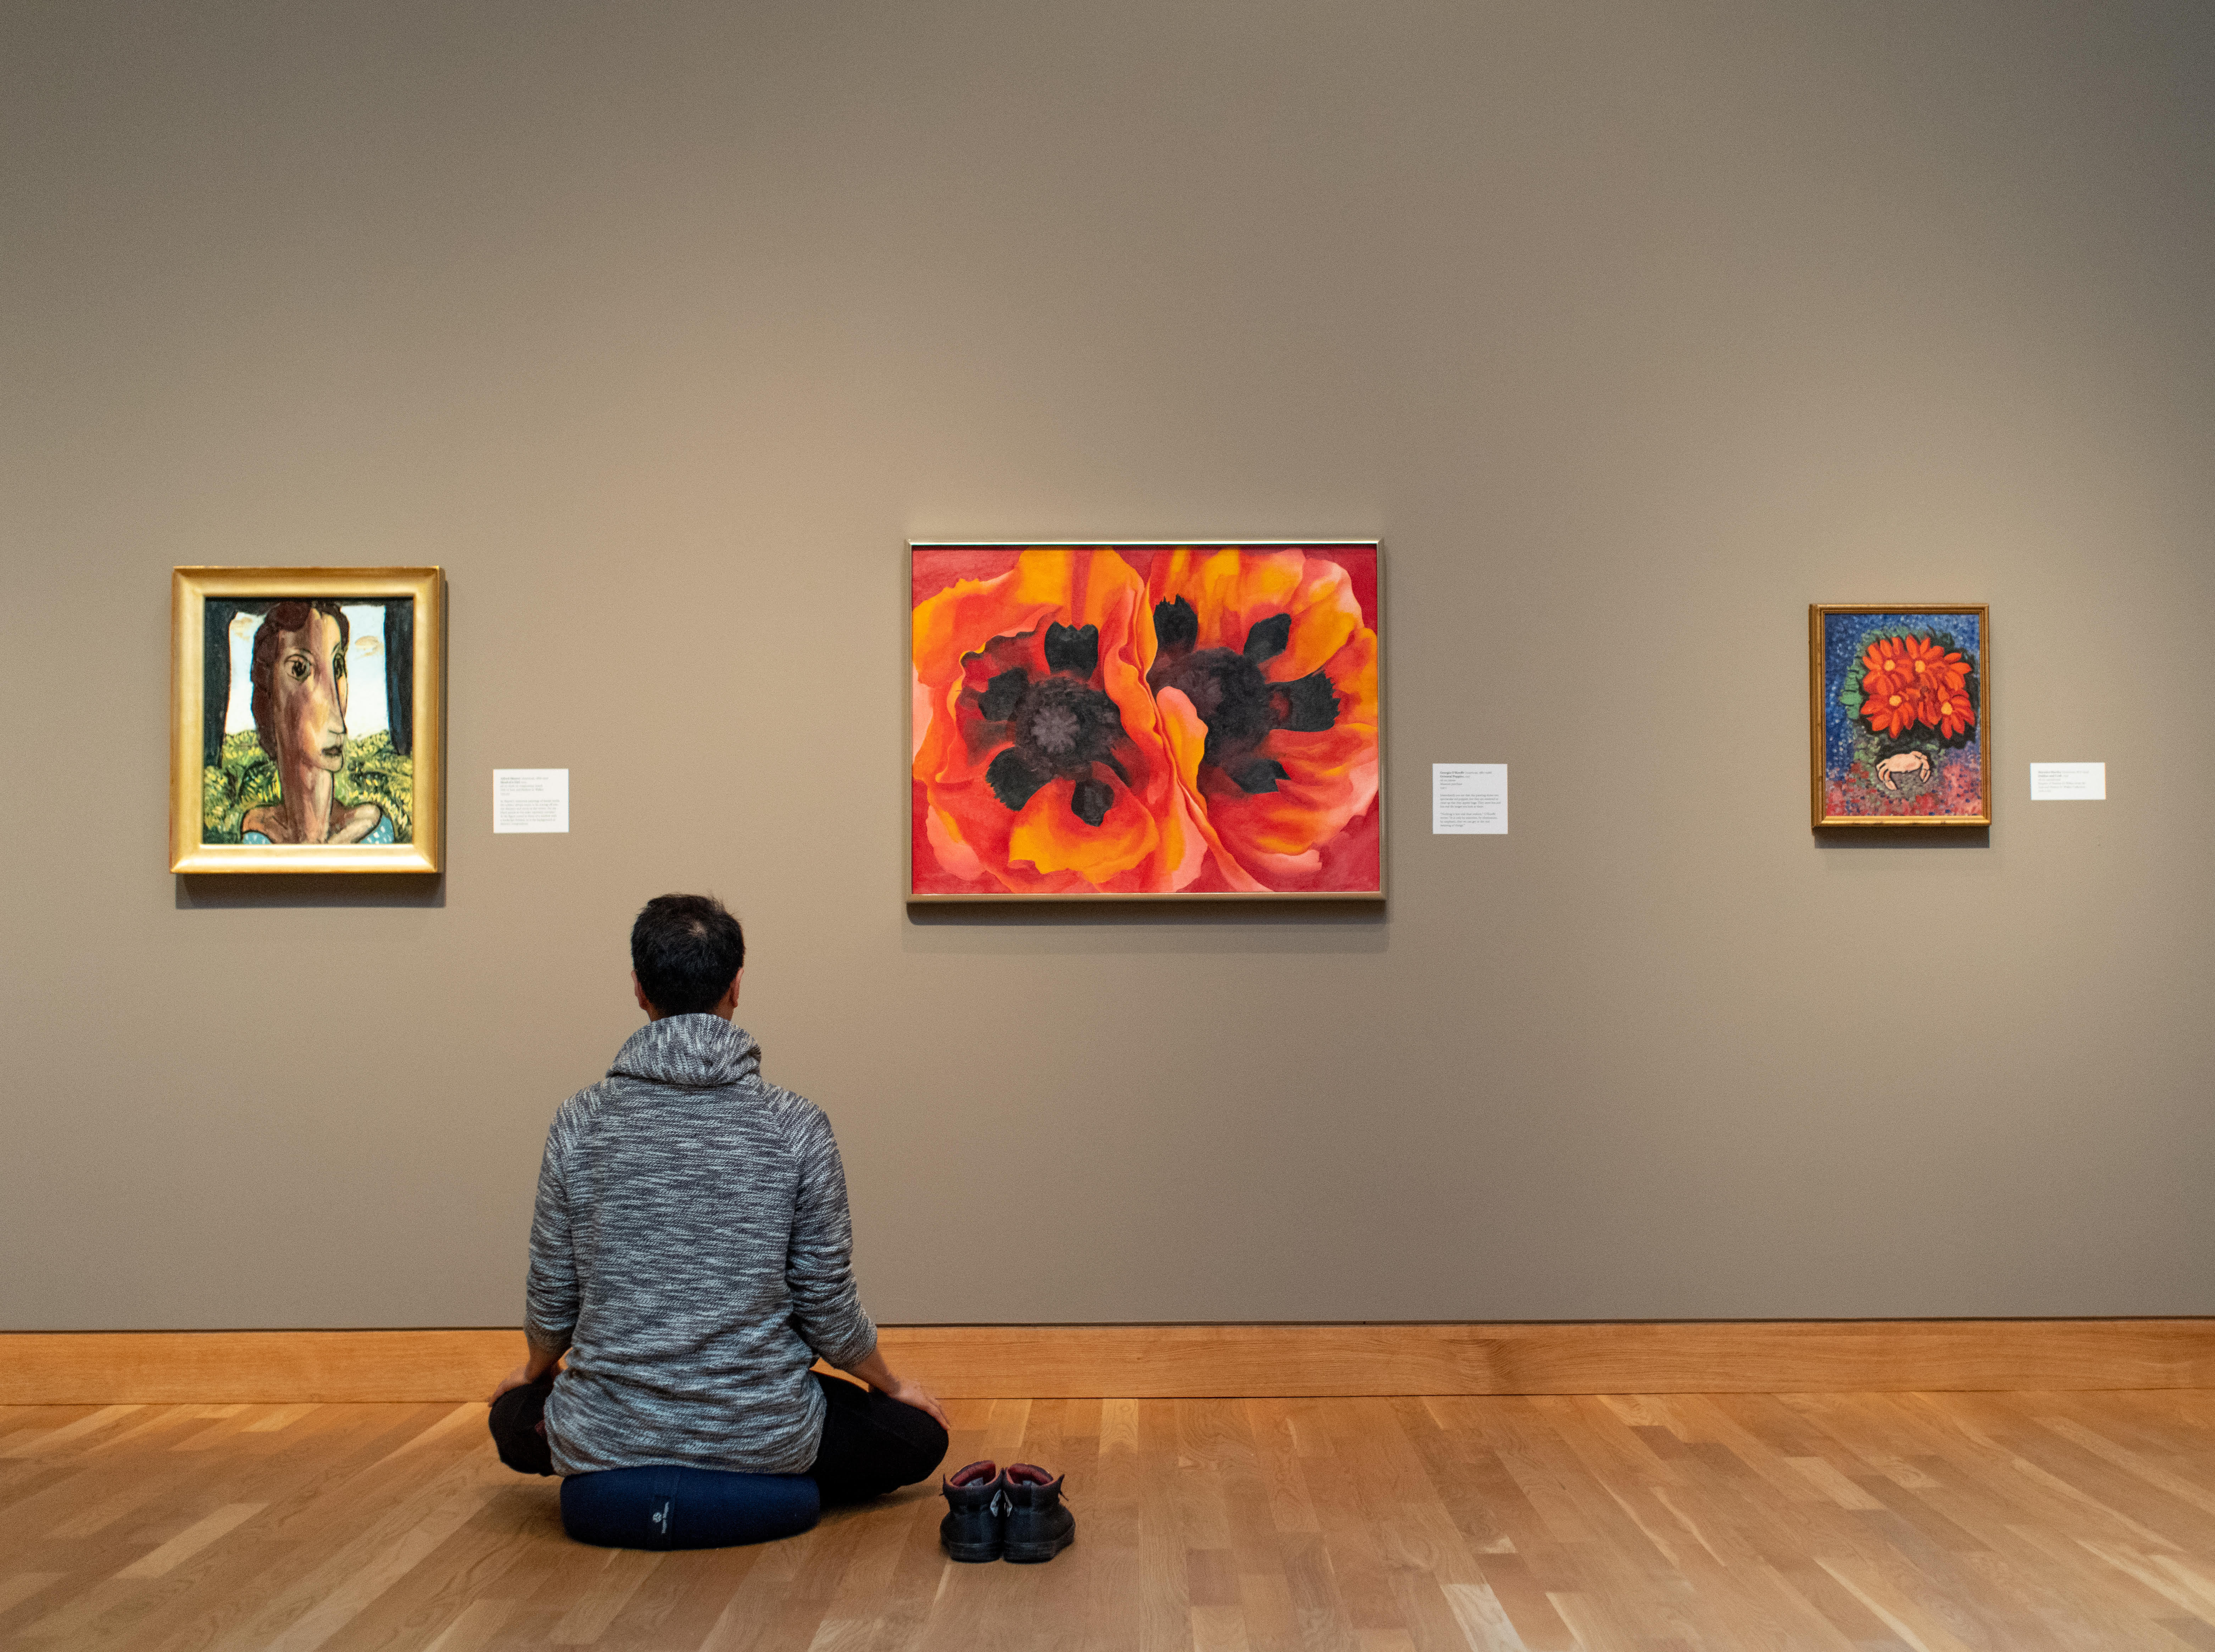 A person sitting on the floor looking at art